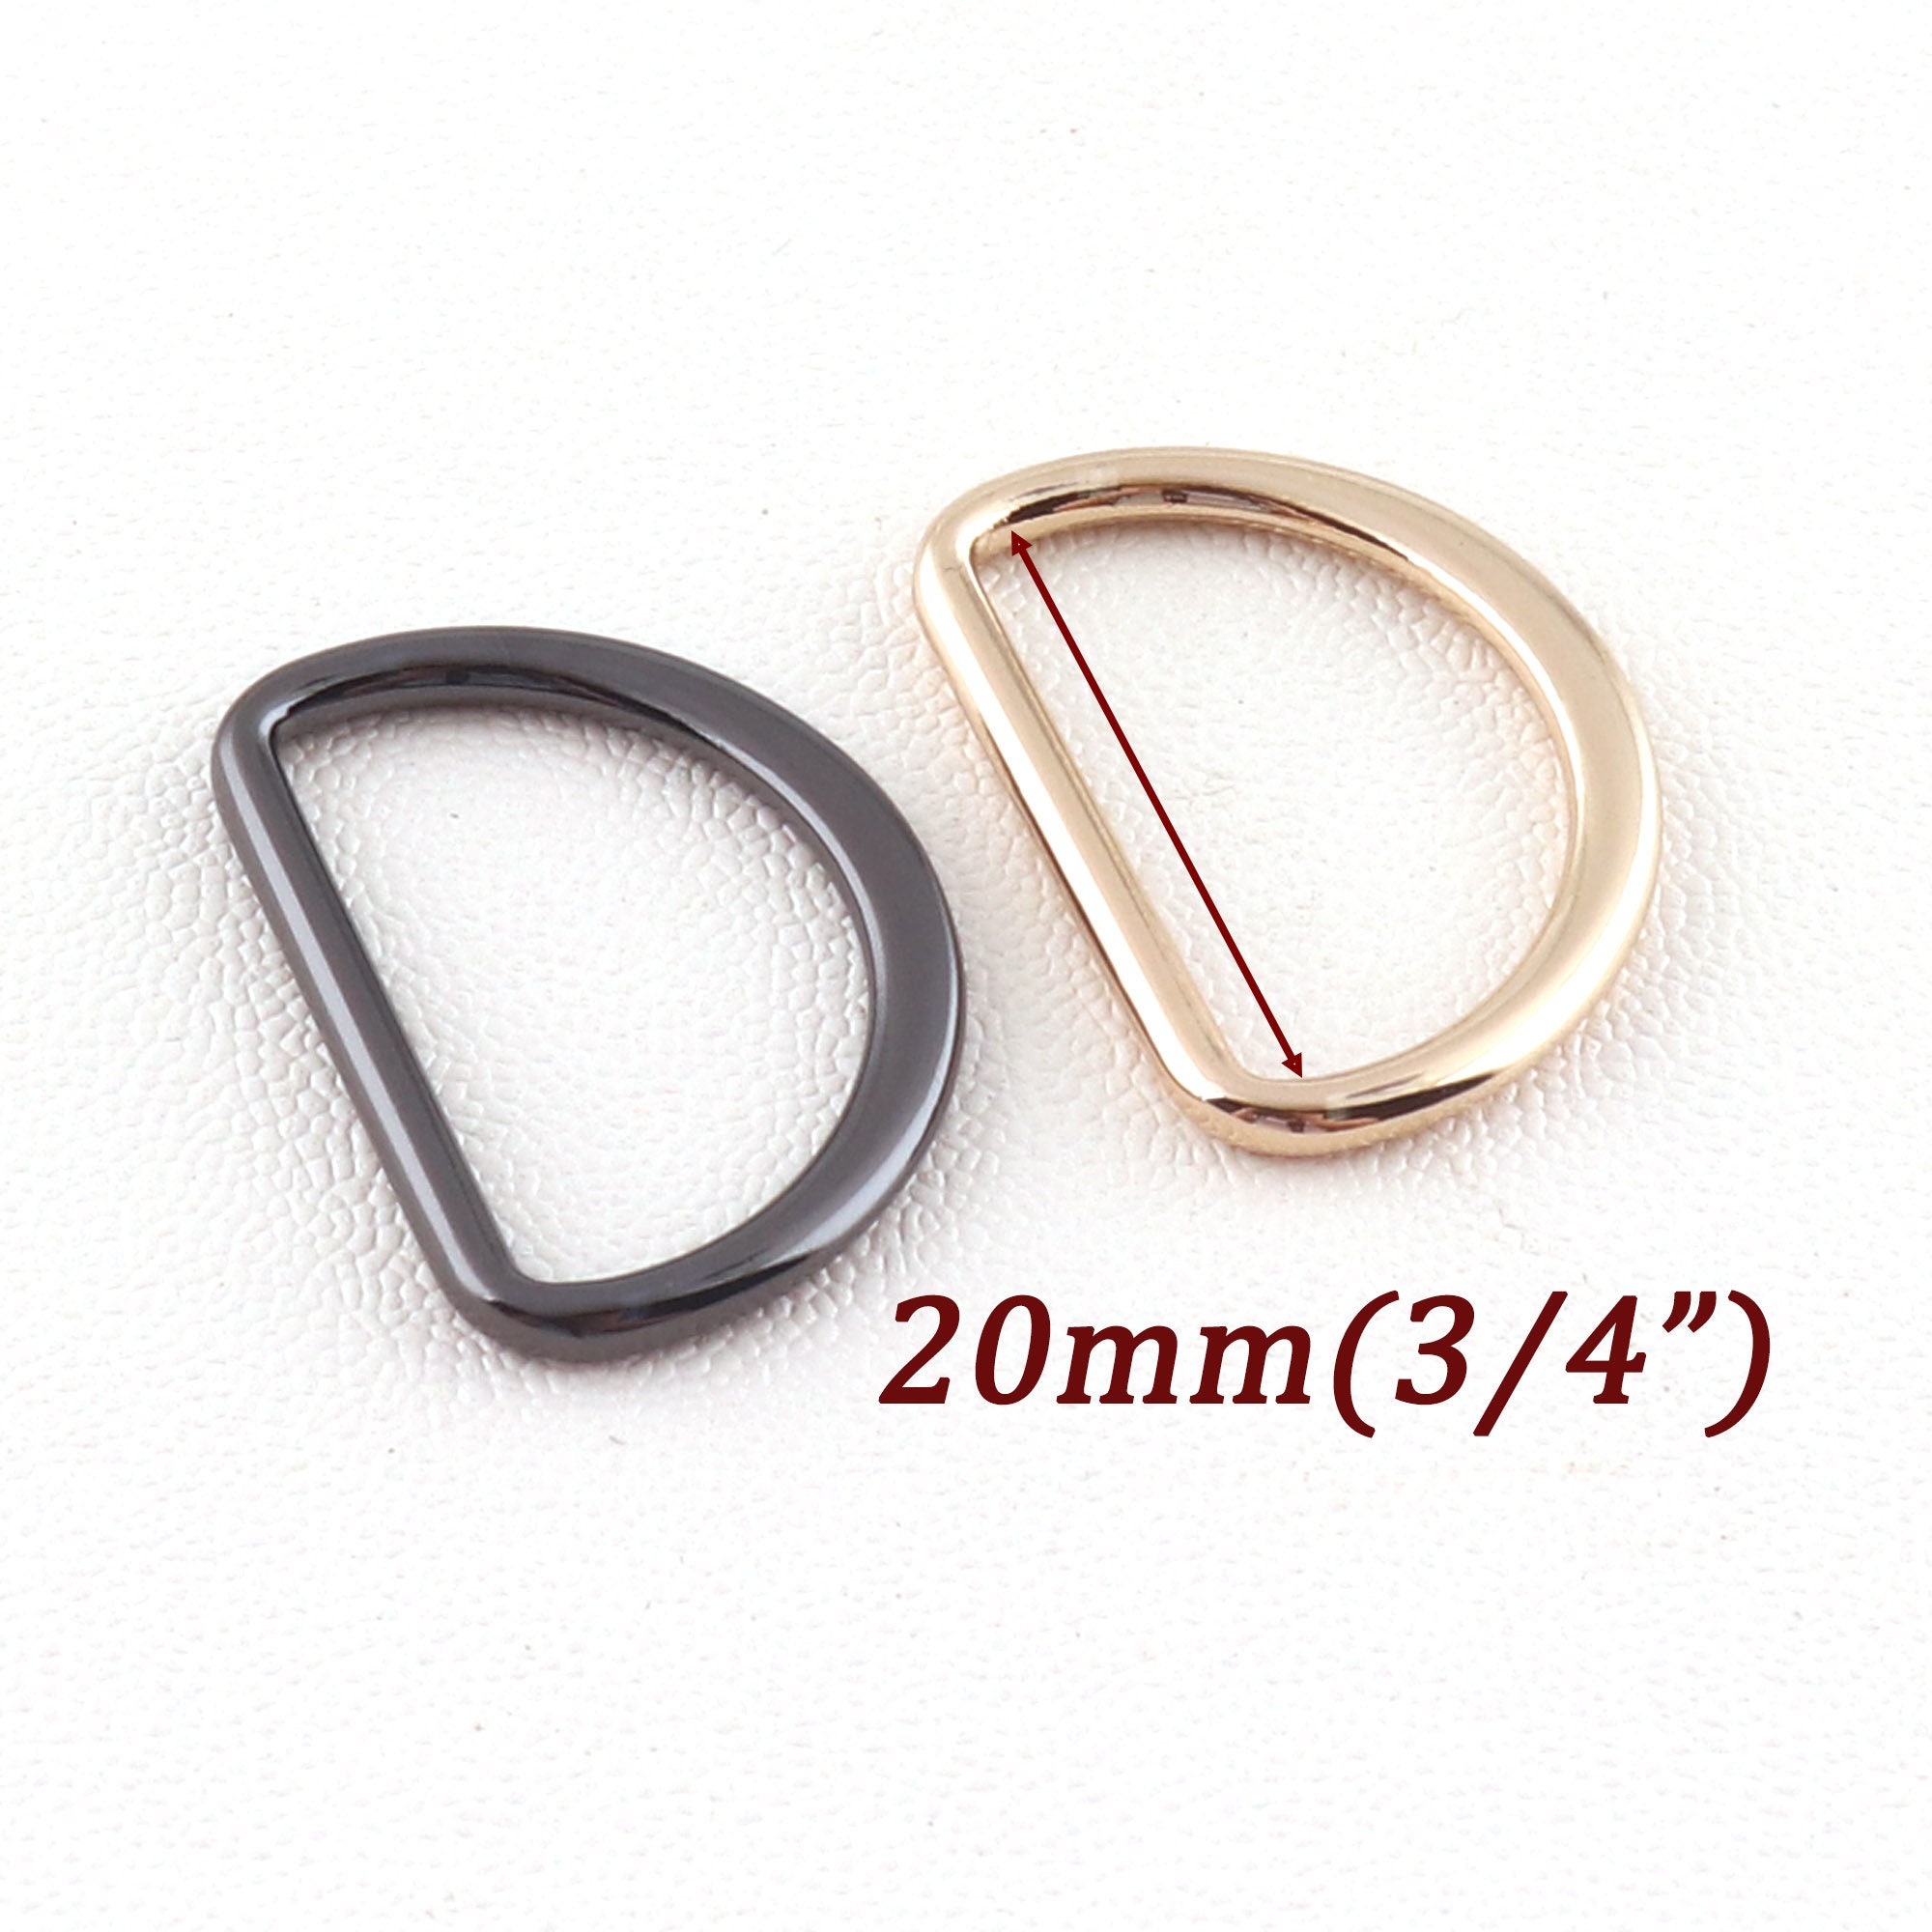 2 Inch Gold/gunmetal D Rings Metal D-rings Large D Ring D Loop D Circles  for Clothing/leather Working Hardware Supplies 